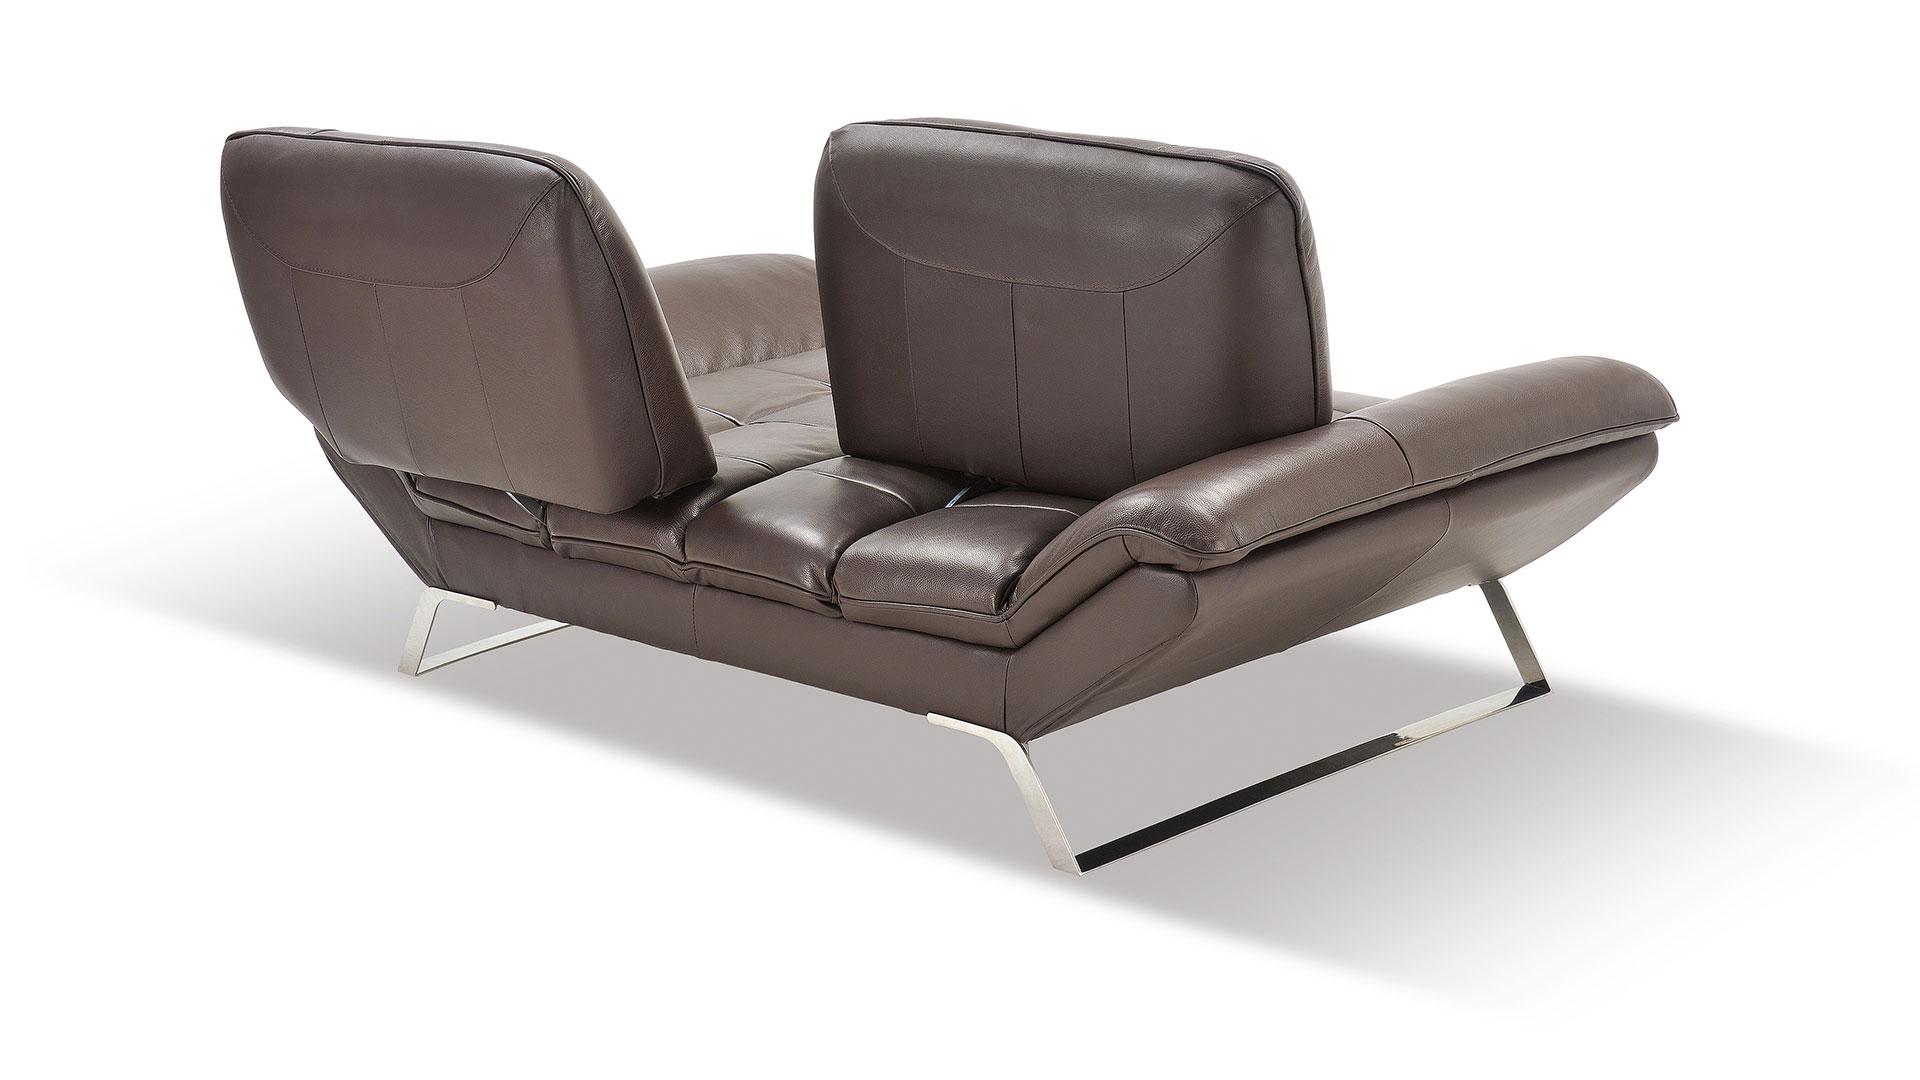 Contemporary Loveseat Roxi SKULATE702 in Chocolate Leather